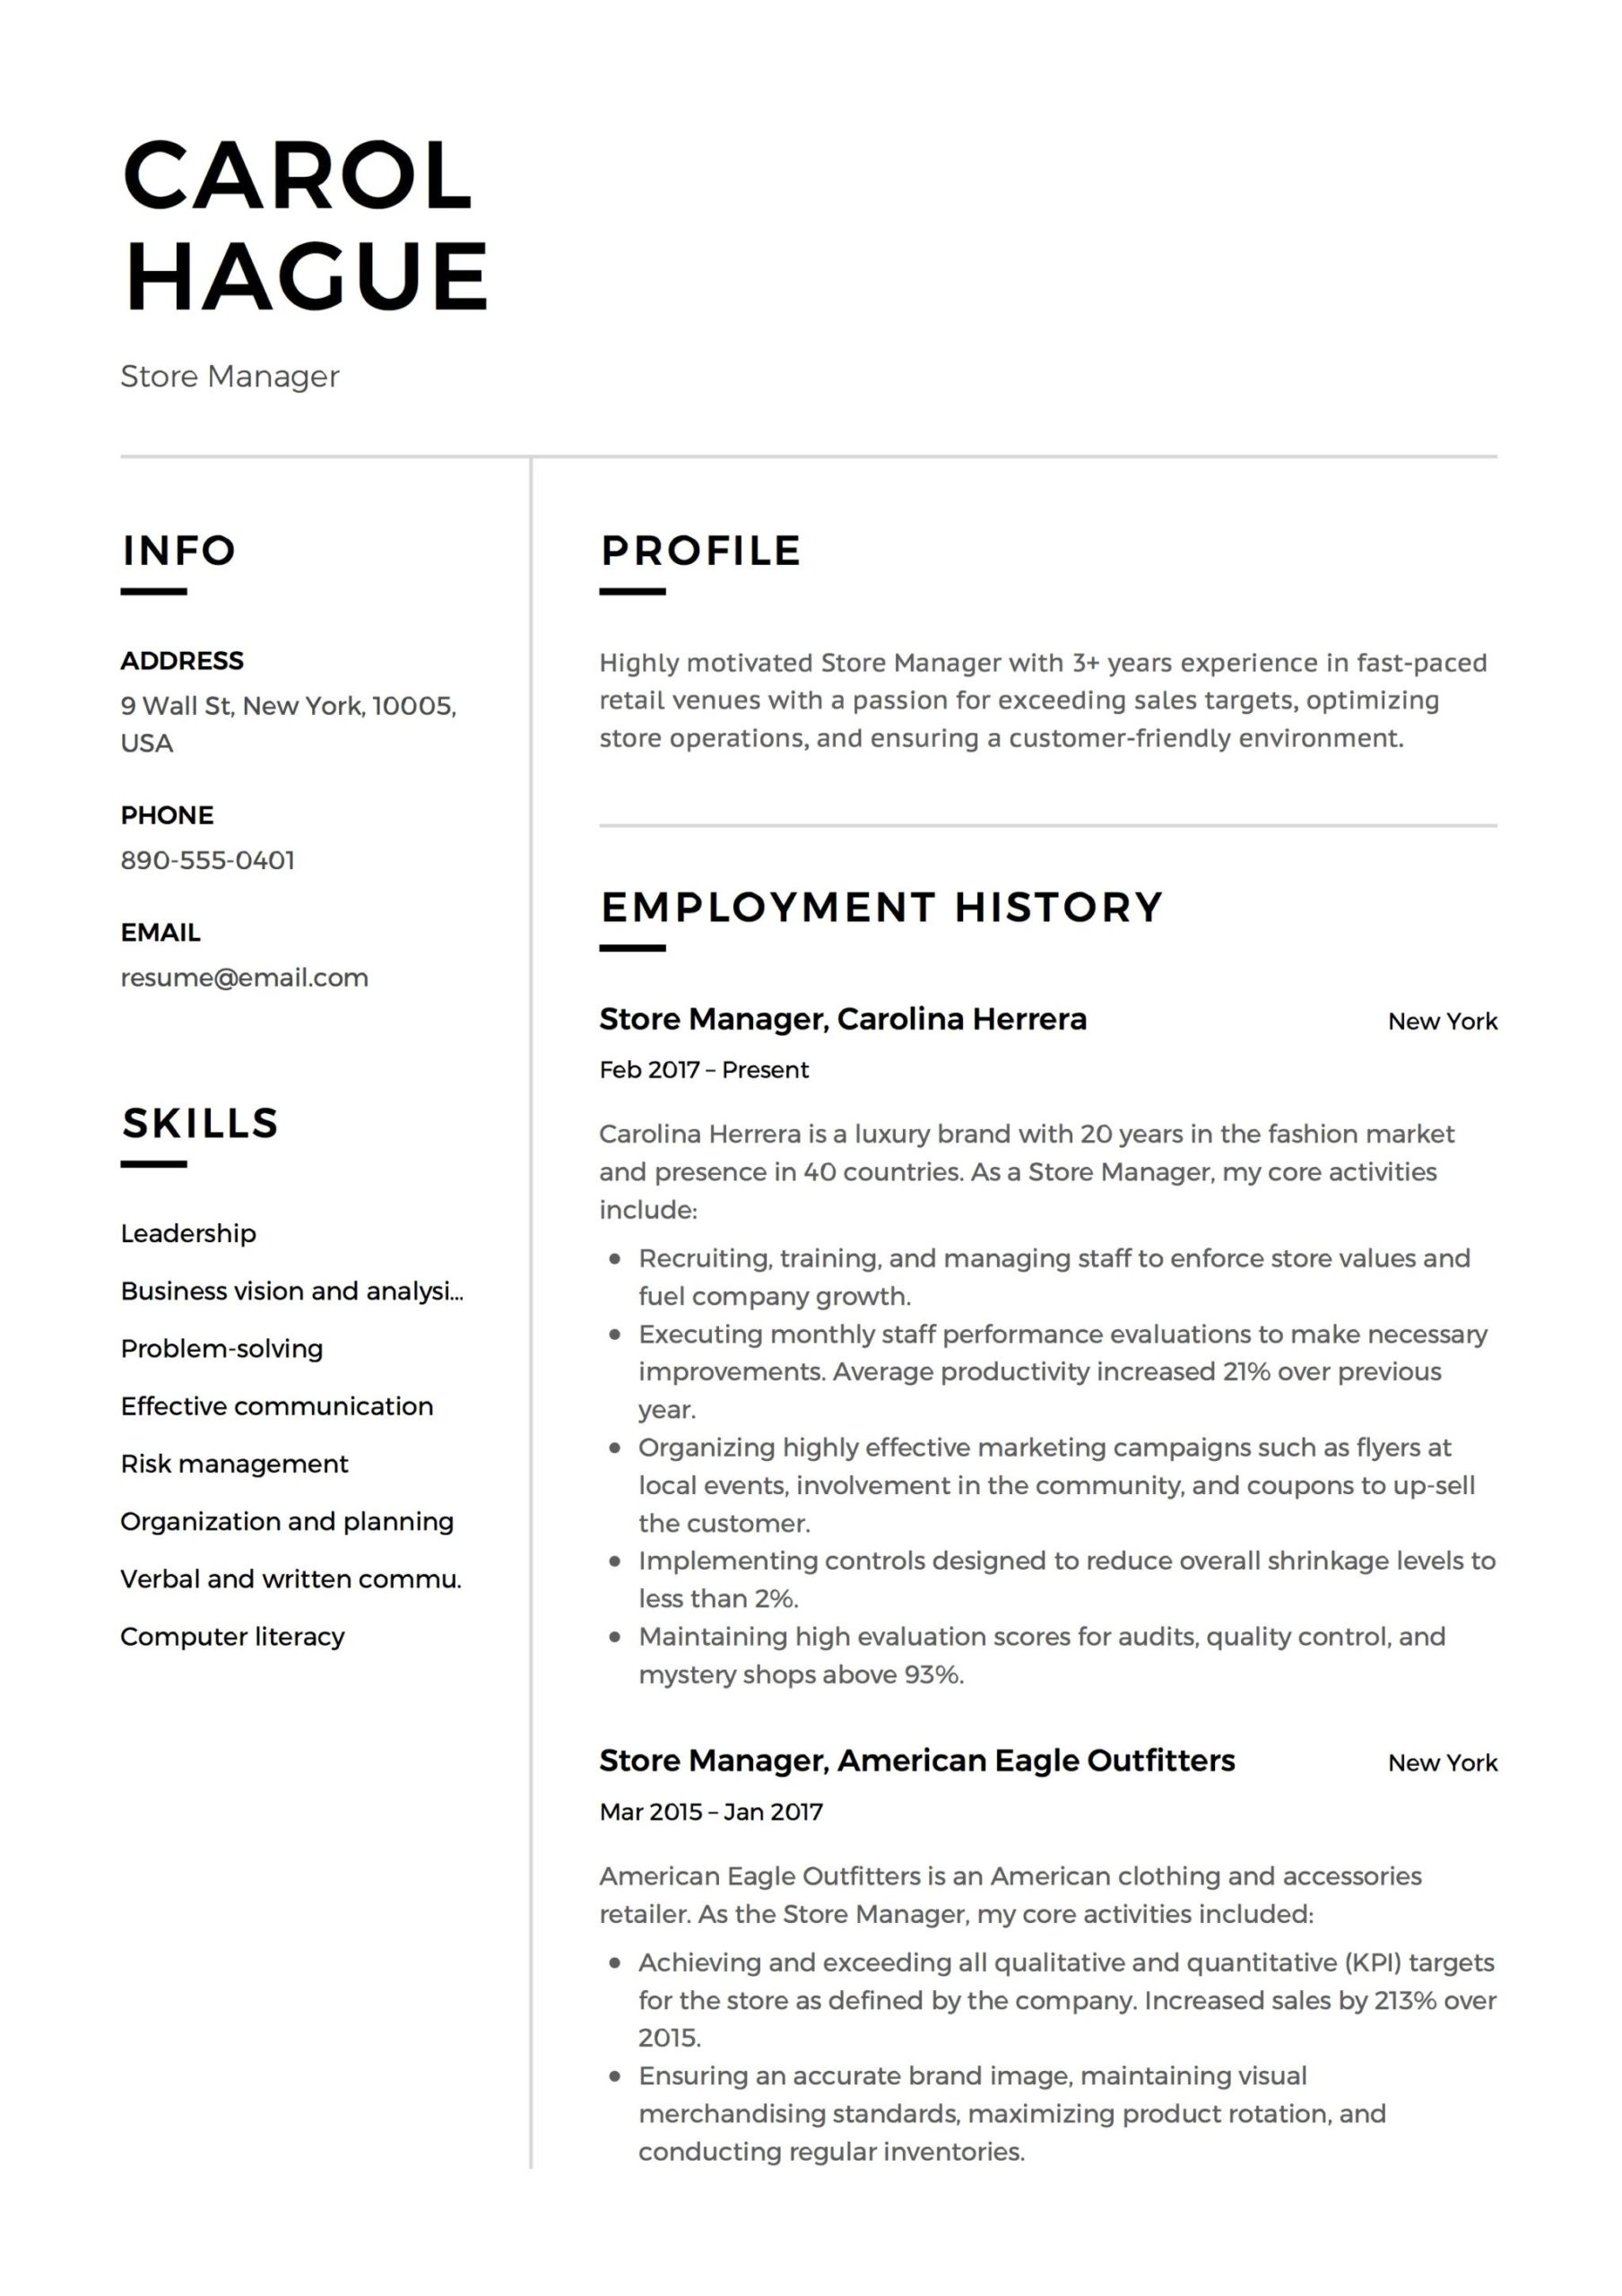 Sample Resume Department Store Sales Professional Retail Resume Examples 2022 Free Downloads Pdfs